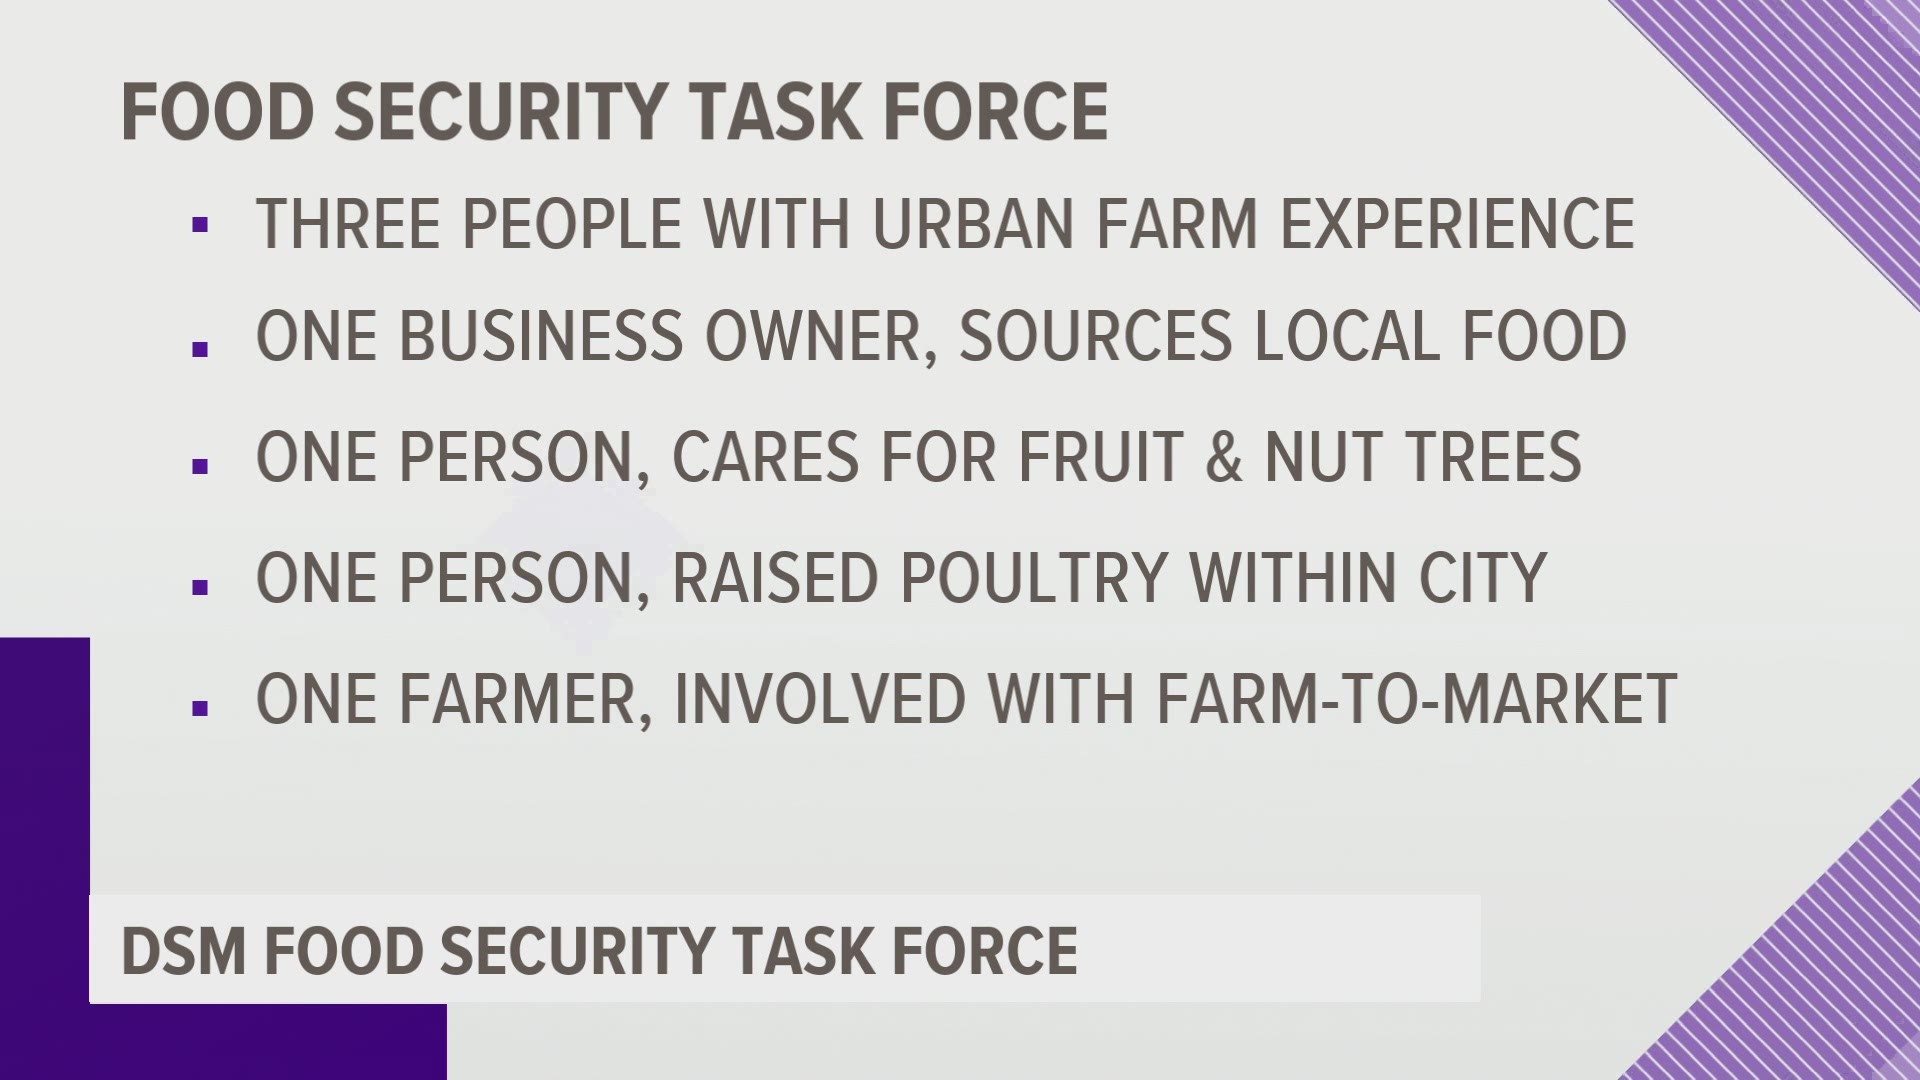 The task force will be made up of seven members, each with unique backgrounds that allow them to empower others to produce their own food and provide for others.